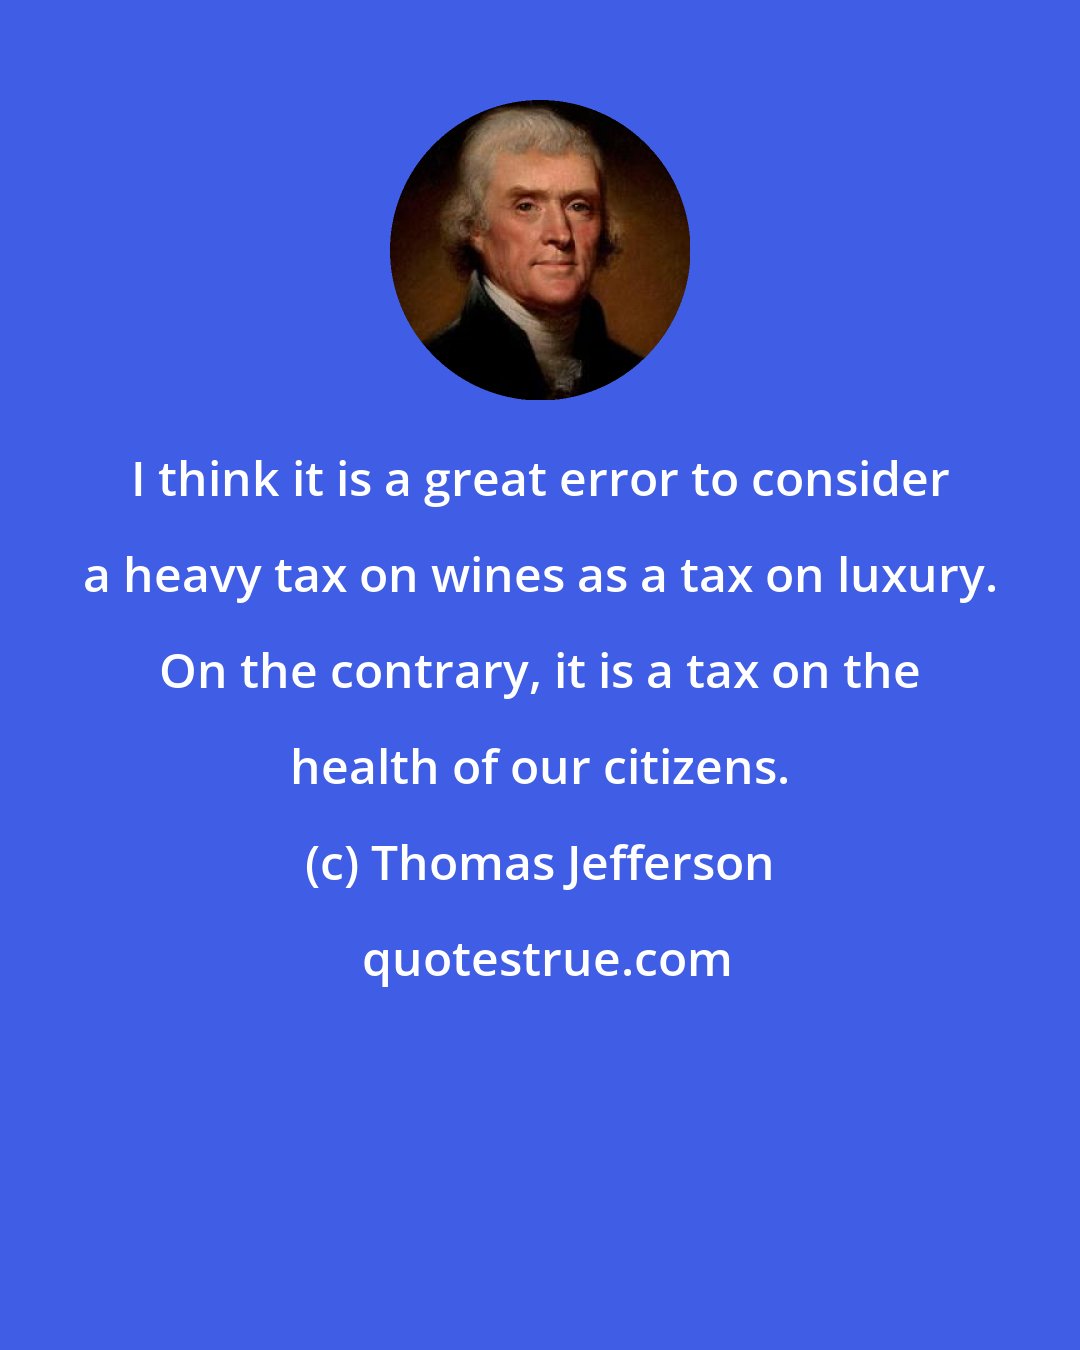 Thomas Jefferson: I think it is a great error to consider a heavy tax on wines as a tax on luxury. On the contrary, it is a tax on the health of our citizens.